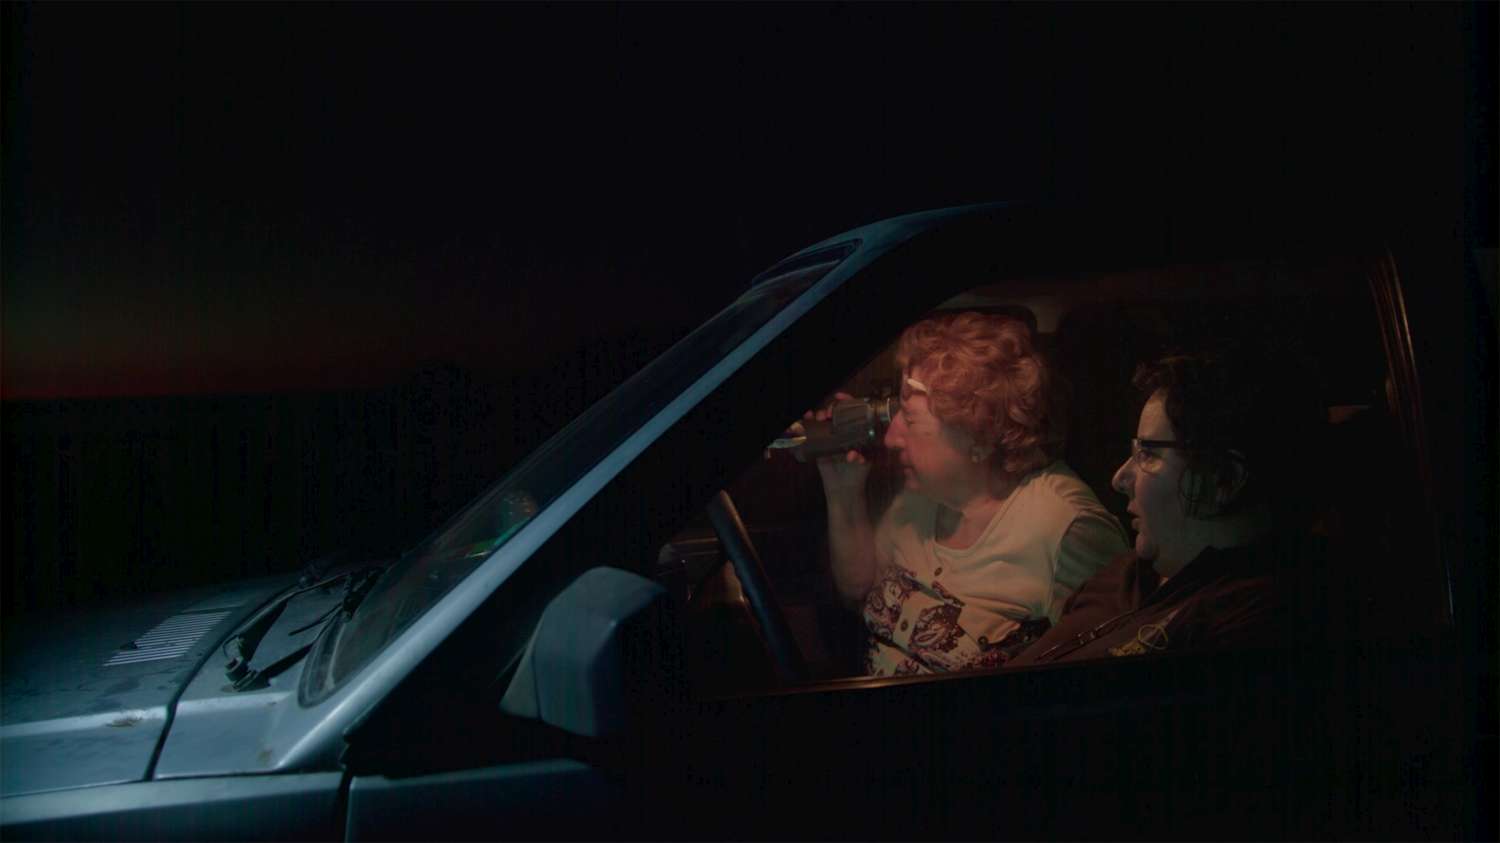 Silvia and Andrea sit in their car at night. The overhead light is on, as they peer outside with binoculars.